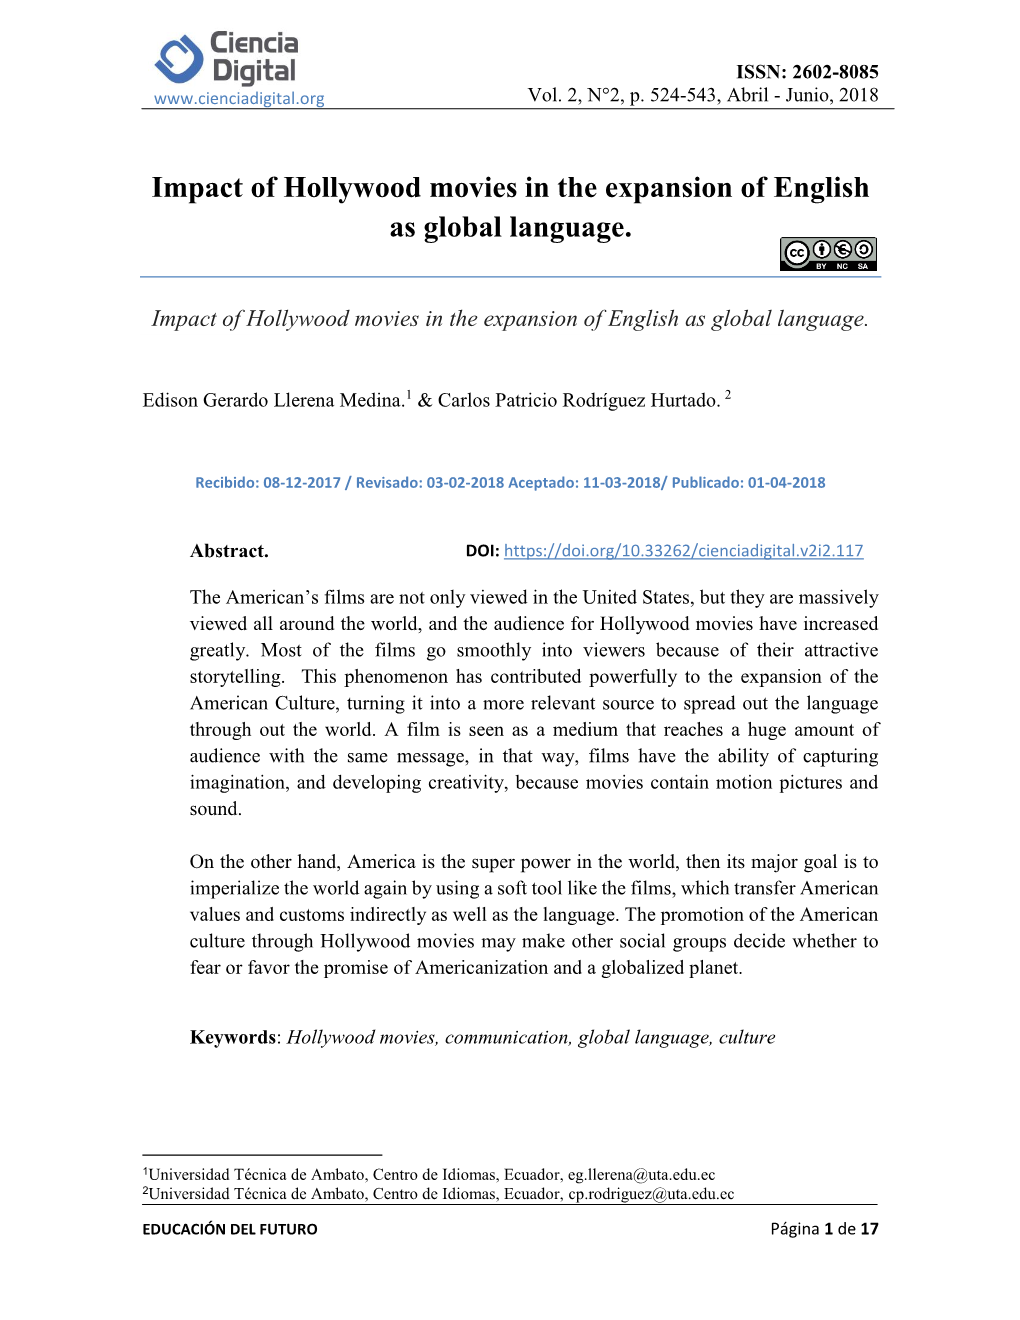 Impact of Hollywood Movies in the Expansion of English As Global Language